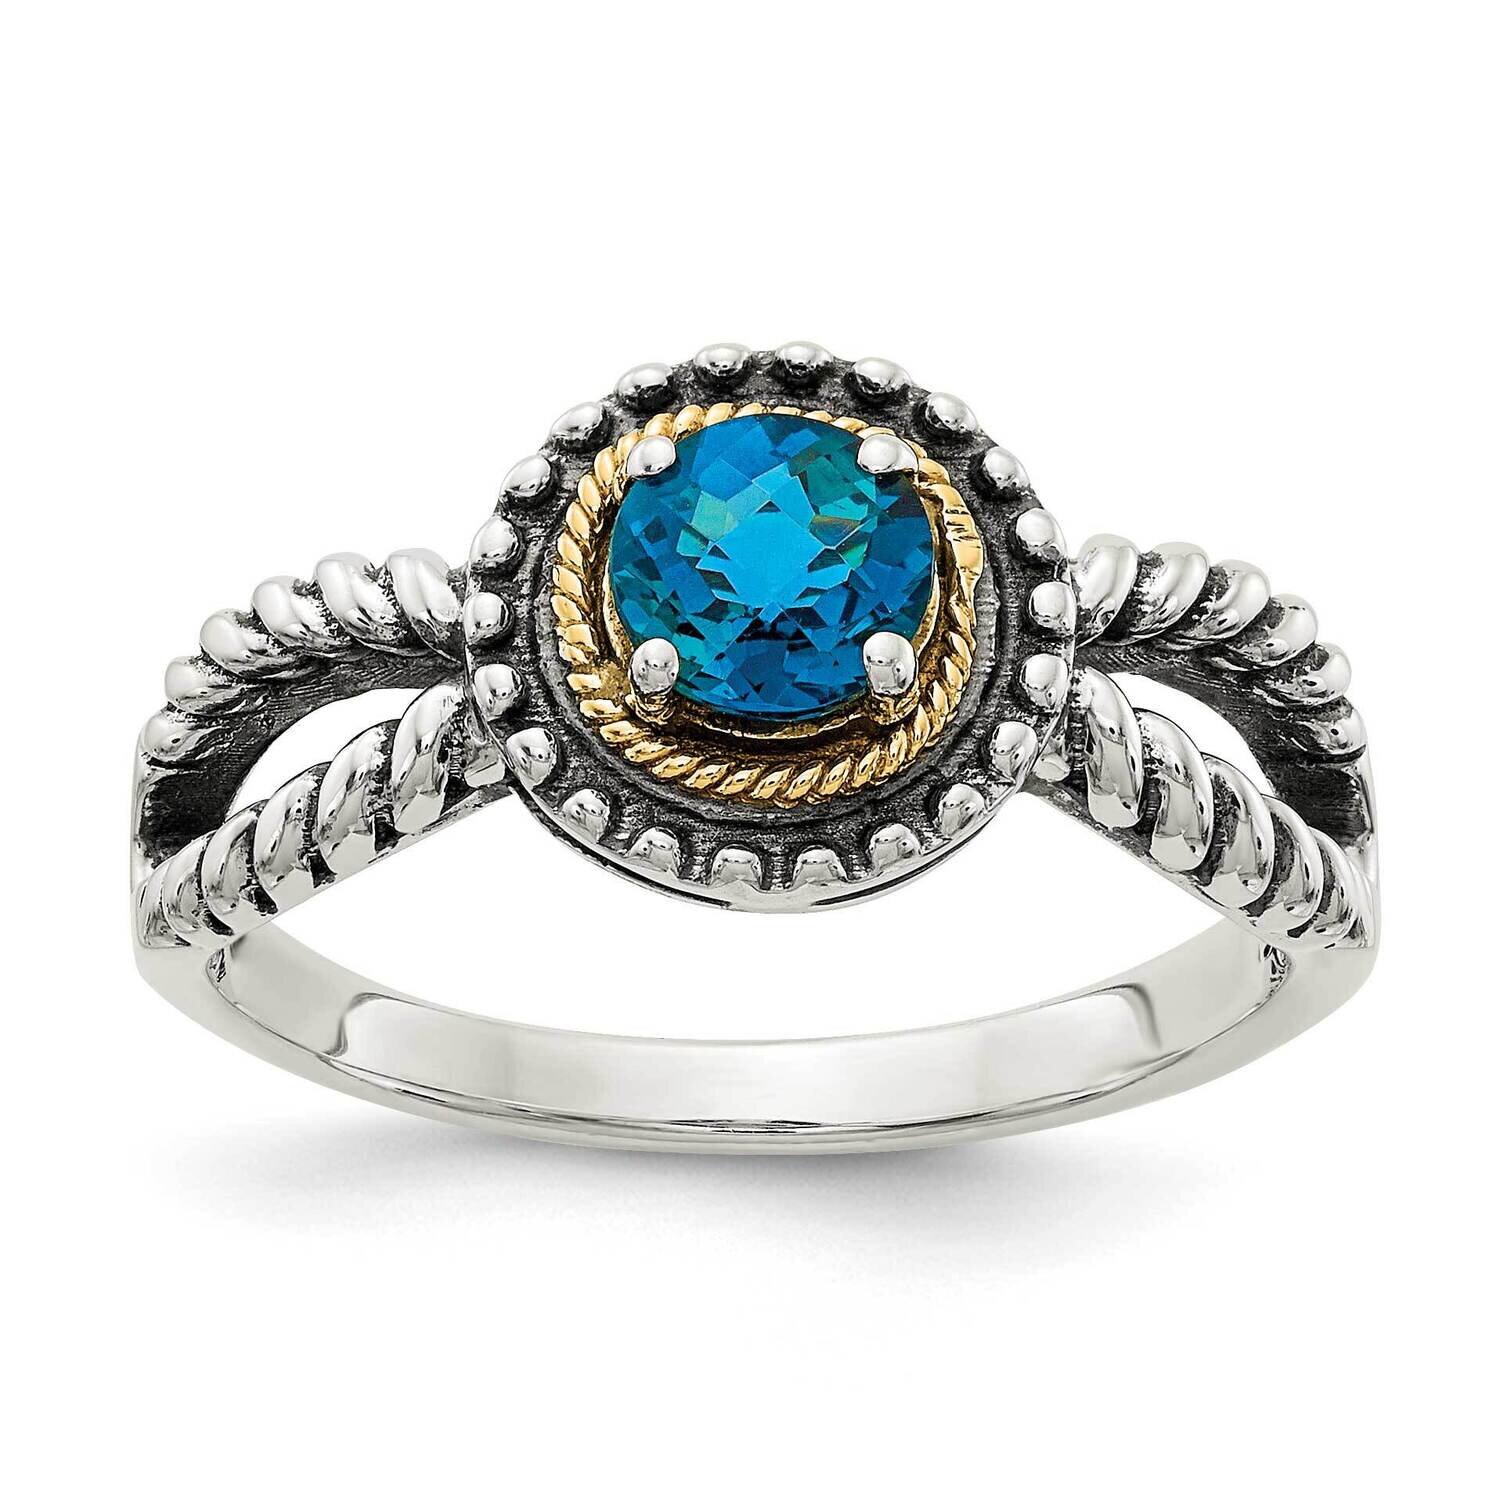 London Blue Topaz Ring Sterling Silver with 14k Gold Accent QTC1632